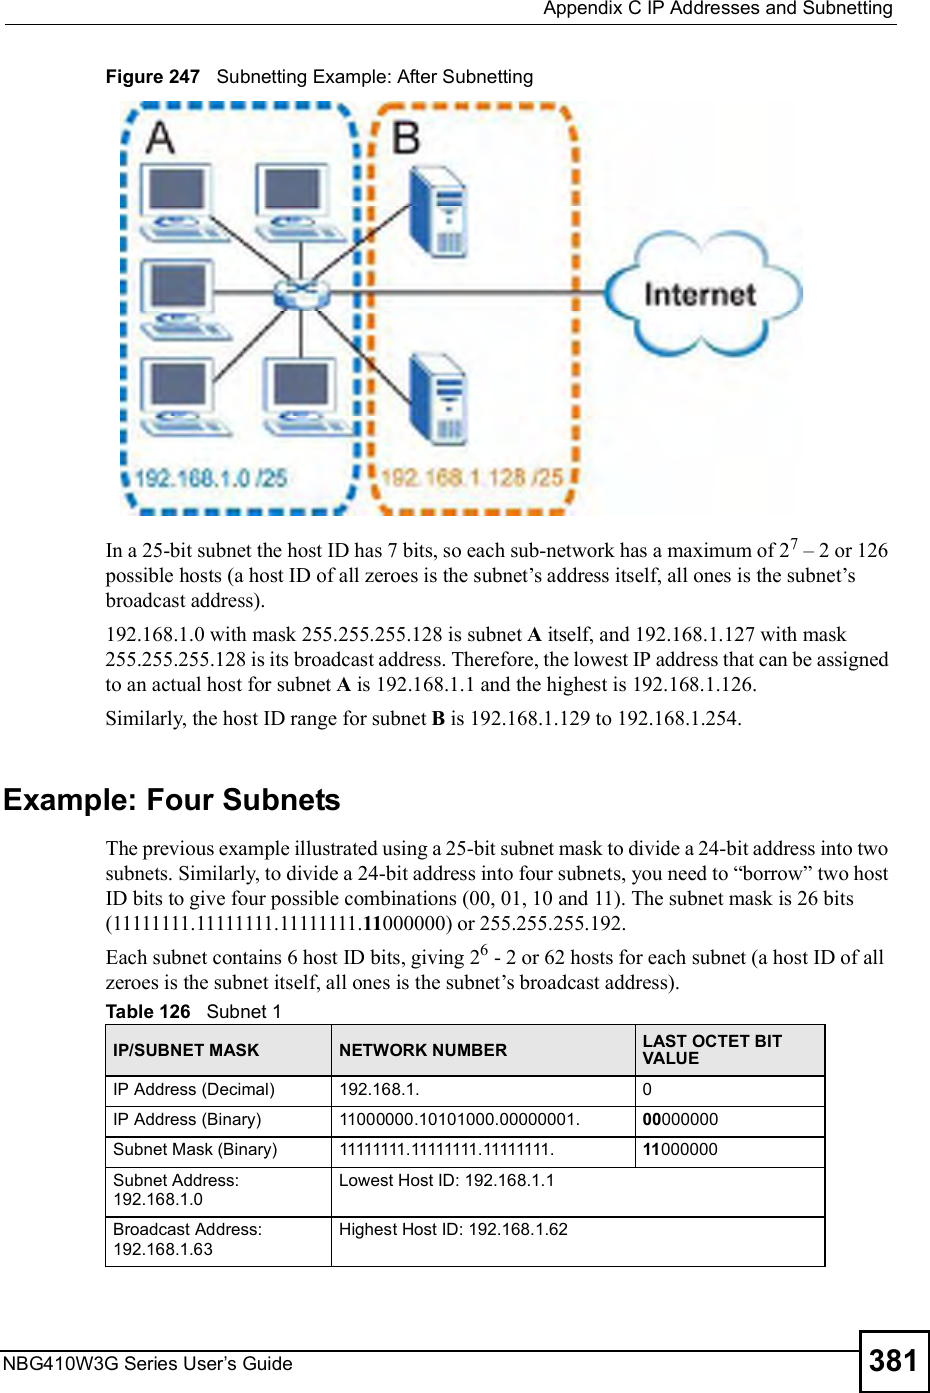  Appendix CIP Addresses and SubnettingNBG410W3G Series User s Guide 381Figure 247   Subnetting Example: After SubnettingIn a 25-bit subnet the host ID has 7 bits, so each sub-network has a maximum of 27 % 2 or 126 possible hosts (a host ID of all zeroes is the subnet!s address itself, all ones is the subnet!s broadcast address).192.168.1.0 with mask 255.255.255.128 is subnet A itself, and 192.168.1.127 with mask 255.255.255.128 is its broadcast address. Therefore, the lowest IP address that can be assigned to an actual host for subnet A is 192.168.1.1 and the highest is 192.168.1.126. Similarly, the host ID range for subnet B is 192.168.1.129 to 192.168.1.254.Example: Four Subnets The previous example illustrated using a 25-bit subnet mask to divide a 24-bit address into two subnets. Similarly, to divide a 24-bit address into four subnets, you need to &quot;borrow# two host ID bits to give four possible combinations (00, 01, 10 and 11). The subnet mask is 26 bits (11111111.11111111.11111111.11000000) or 255.255.255.192. Each subnet contains 6 host ID bits, giving 26 - 2 or 62 hosts for each subnet (a host ID of all zeroes is the subnet itself, all ones is the subnet!s broadcast address). Table 126   Subnet 1IP/SUBNET MASK NETWORK NUMBER LAST OCTET BIT VALUEIP Address (Decimal) 192.168.1. 0IP Address (Binary) 11000000.10101000.00000001.  00000000Subnet Mask (Binary) 11111111.11111111.11111111. 11000000Subnet Address: 192.168.1.0Lowest Host ID: 192.168.1.1Broadcast Address: 192.168.1.63Highest Host ID: 192.168.1.62